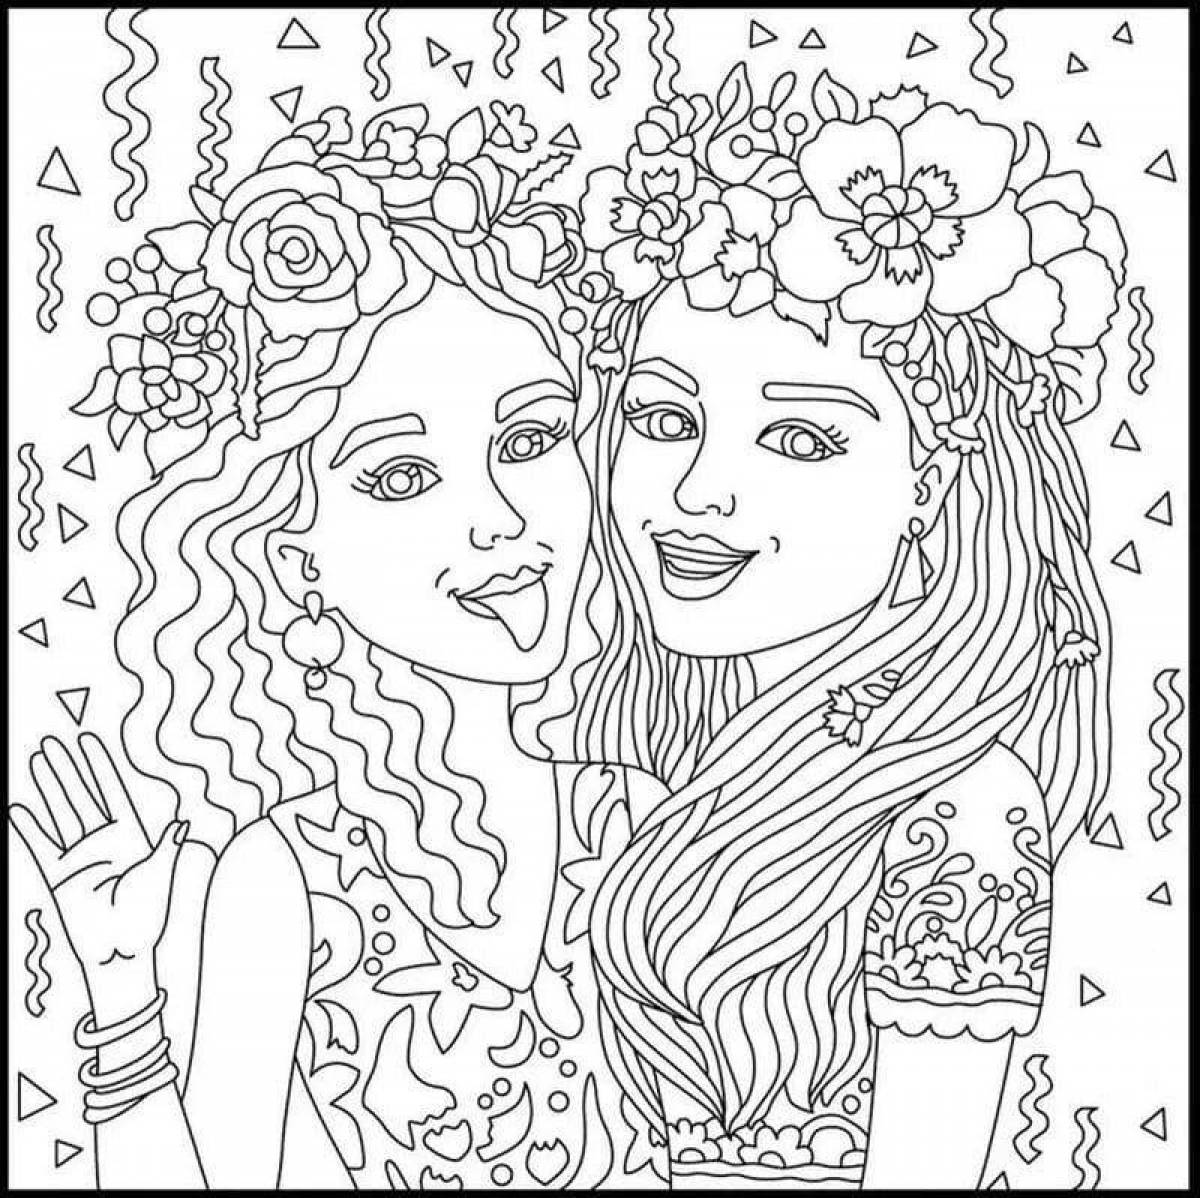 Joyful coloring for girls 13-14 years old